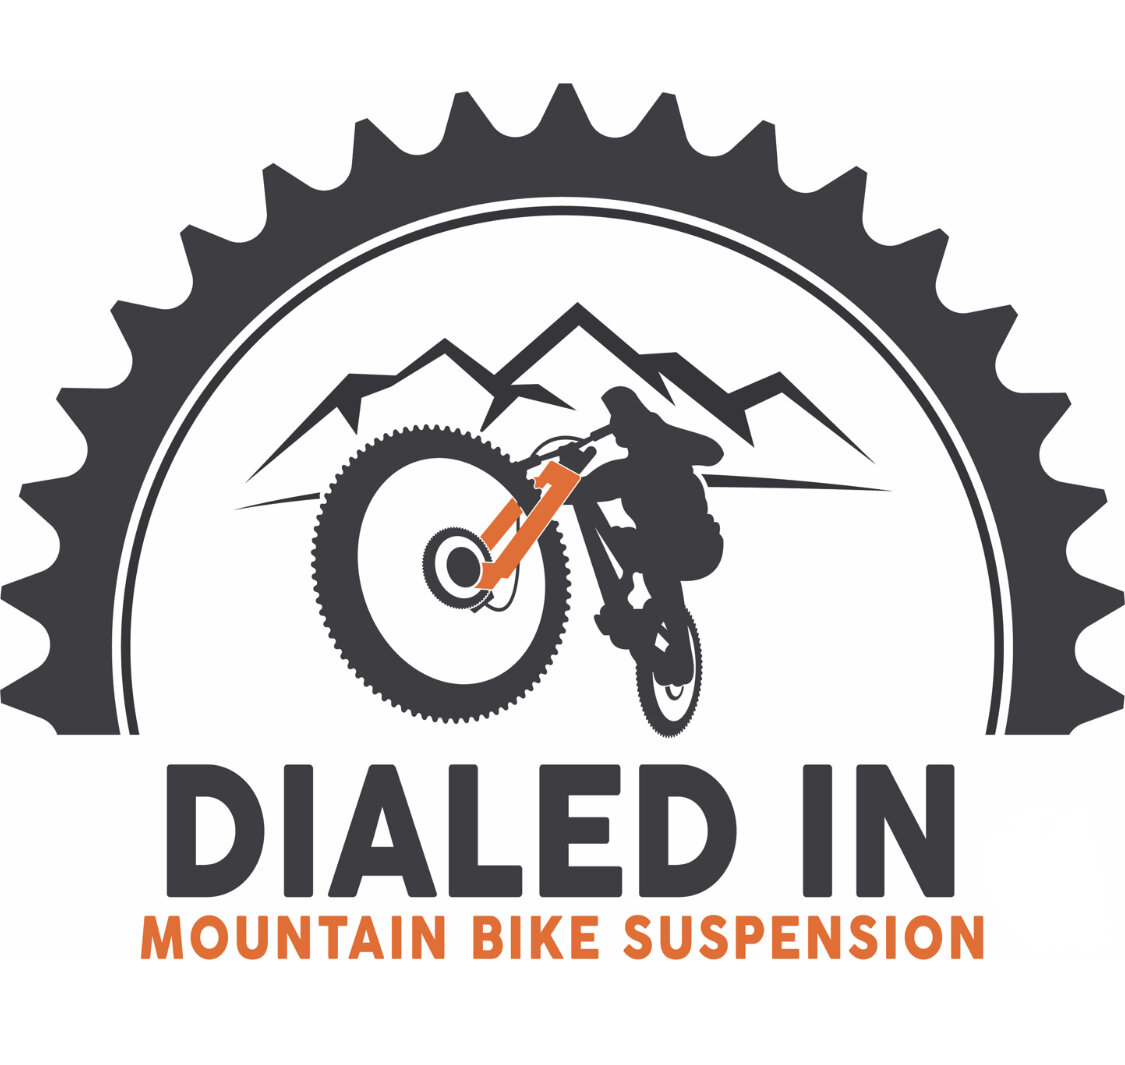 We would like to give a big thanks to one of our sponsors, Dialed In Mountain Bike Suspension! 

Dialed in is a local mountain bike suspension shop specializing in service and repair of all major brands of mountain bikes suspension based out of Roche